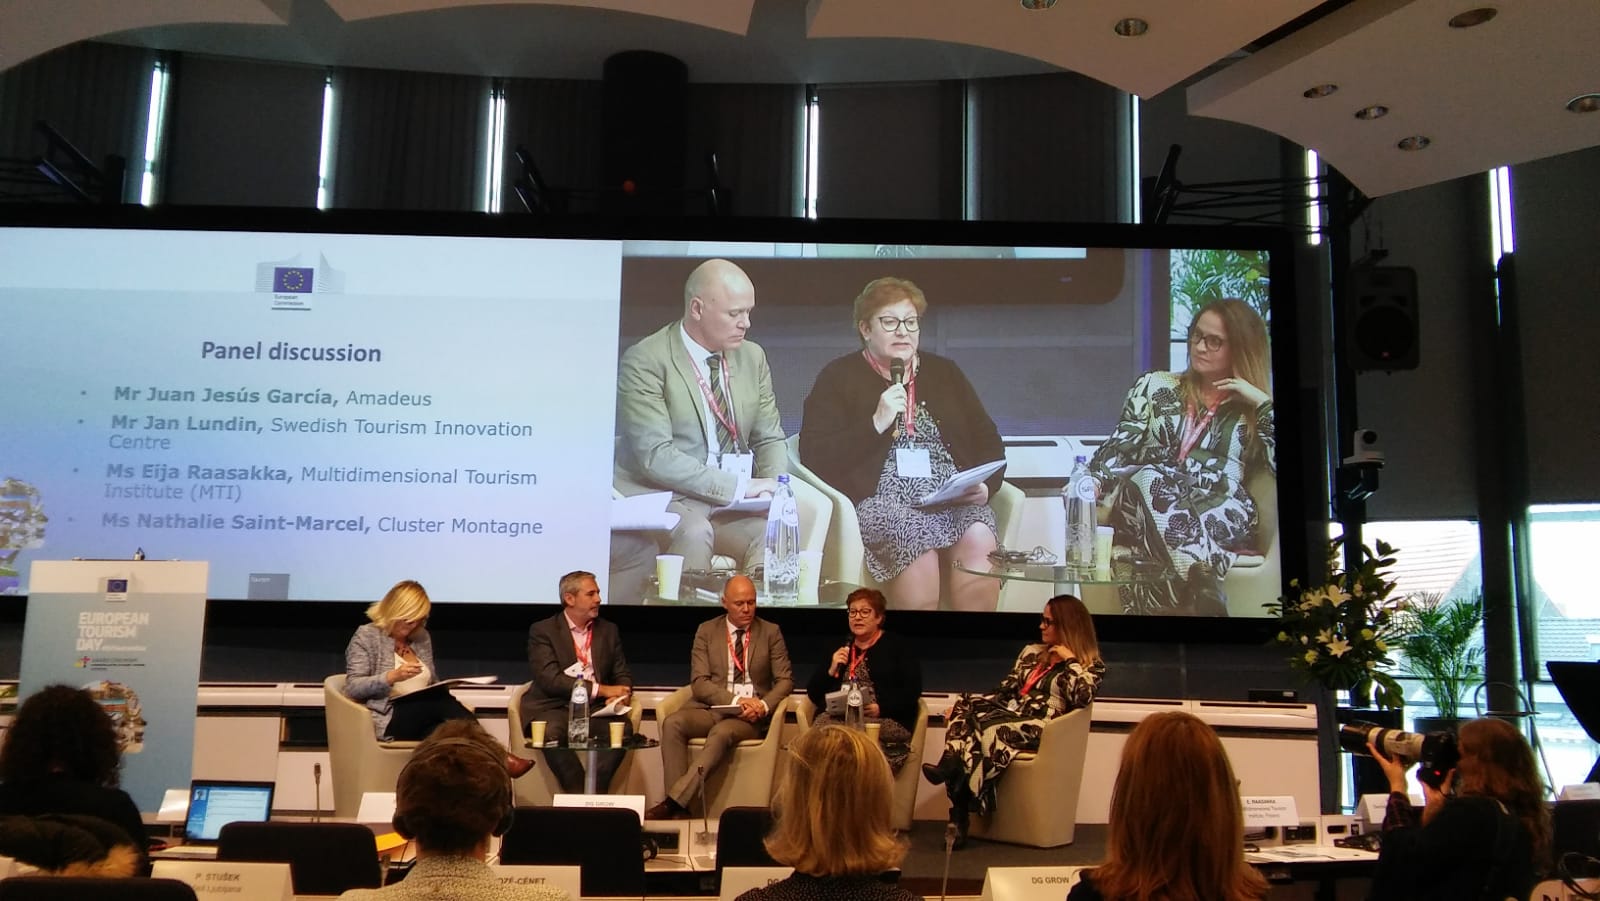 Initiative "Digitalisation and Safety for Tourism" presented at the European Tourism Day 2018